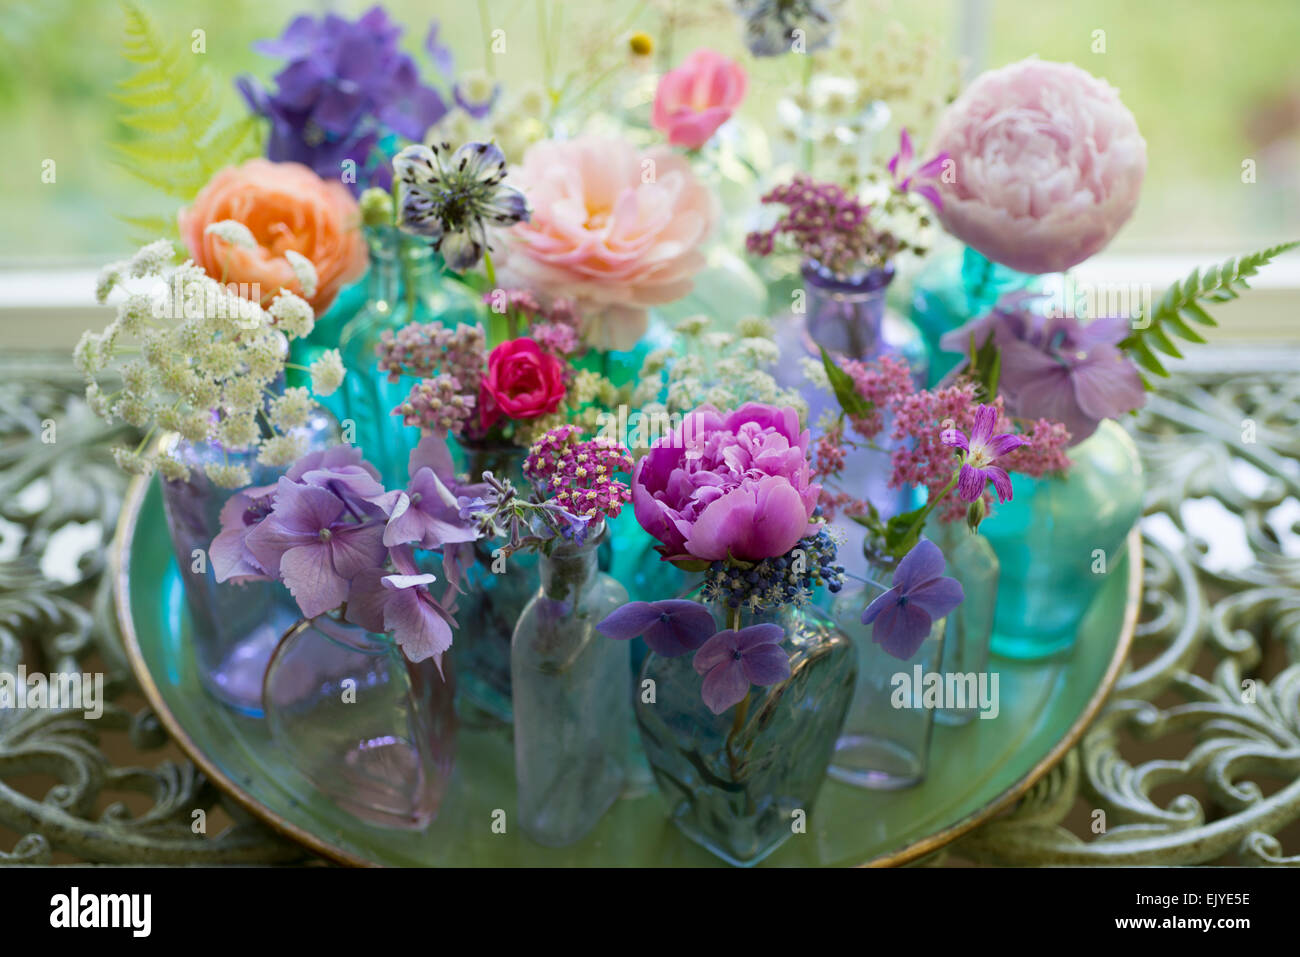 Floral arrangement of cut flowers in blue bottles including roses, hydrangea, peony, yarrow, feverfew and Queen Anne's Lace Stock Photo